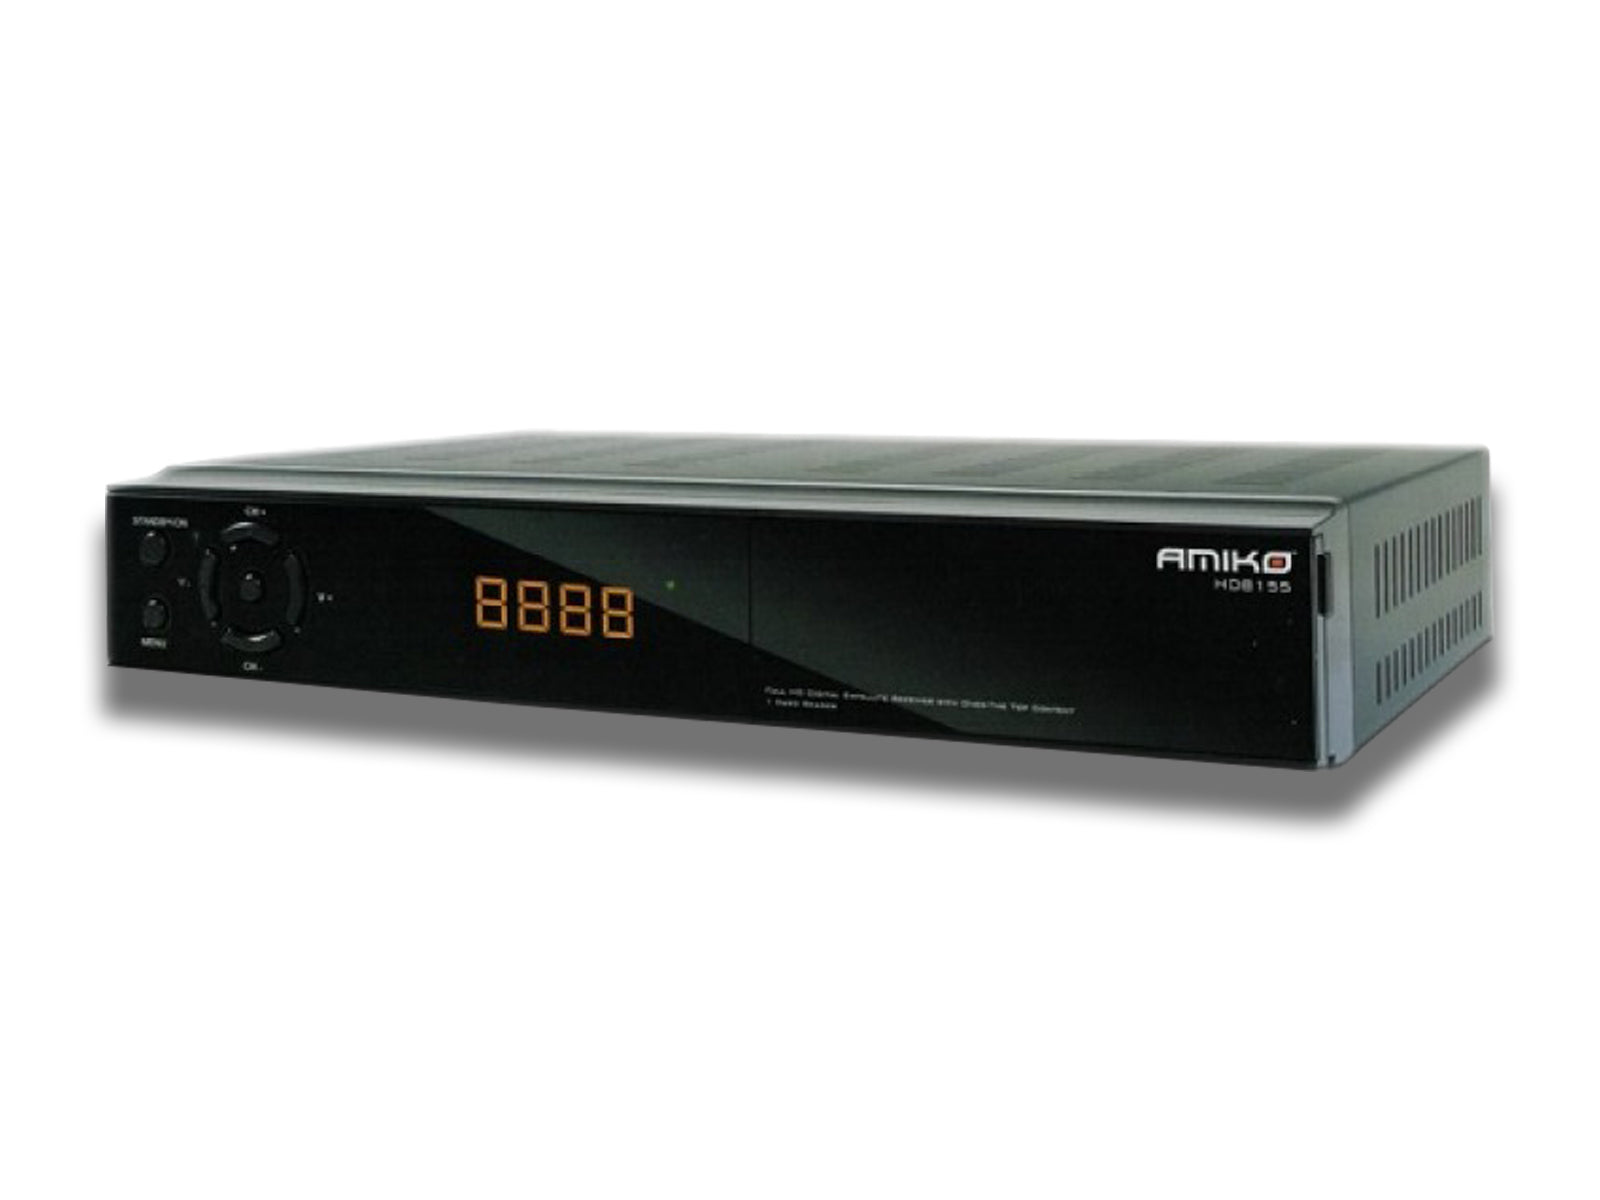 Image shows a front view of the Amiko 8155 HD Satellite Receiver